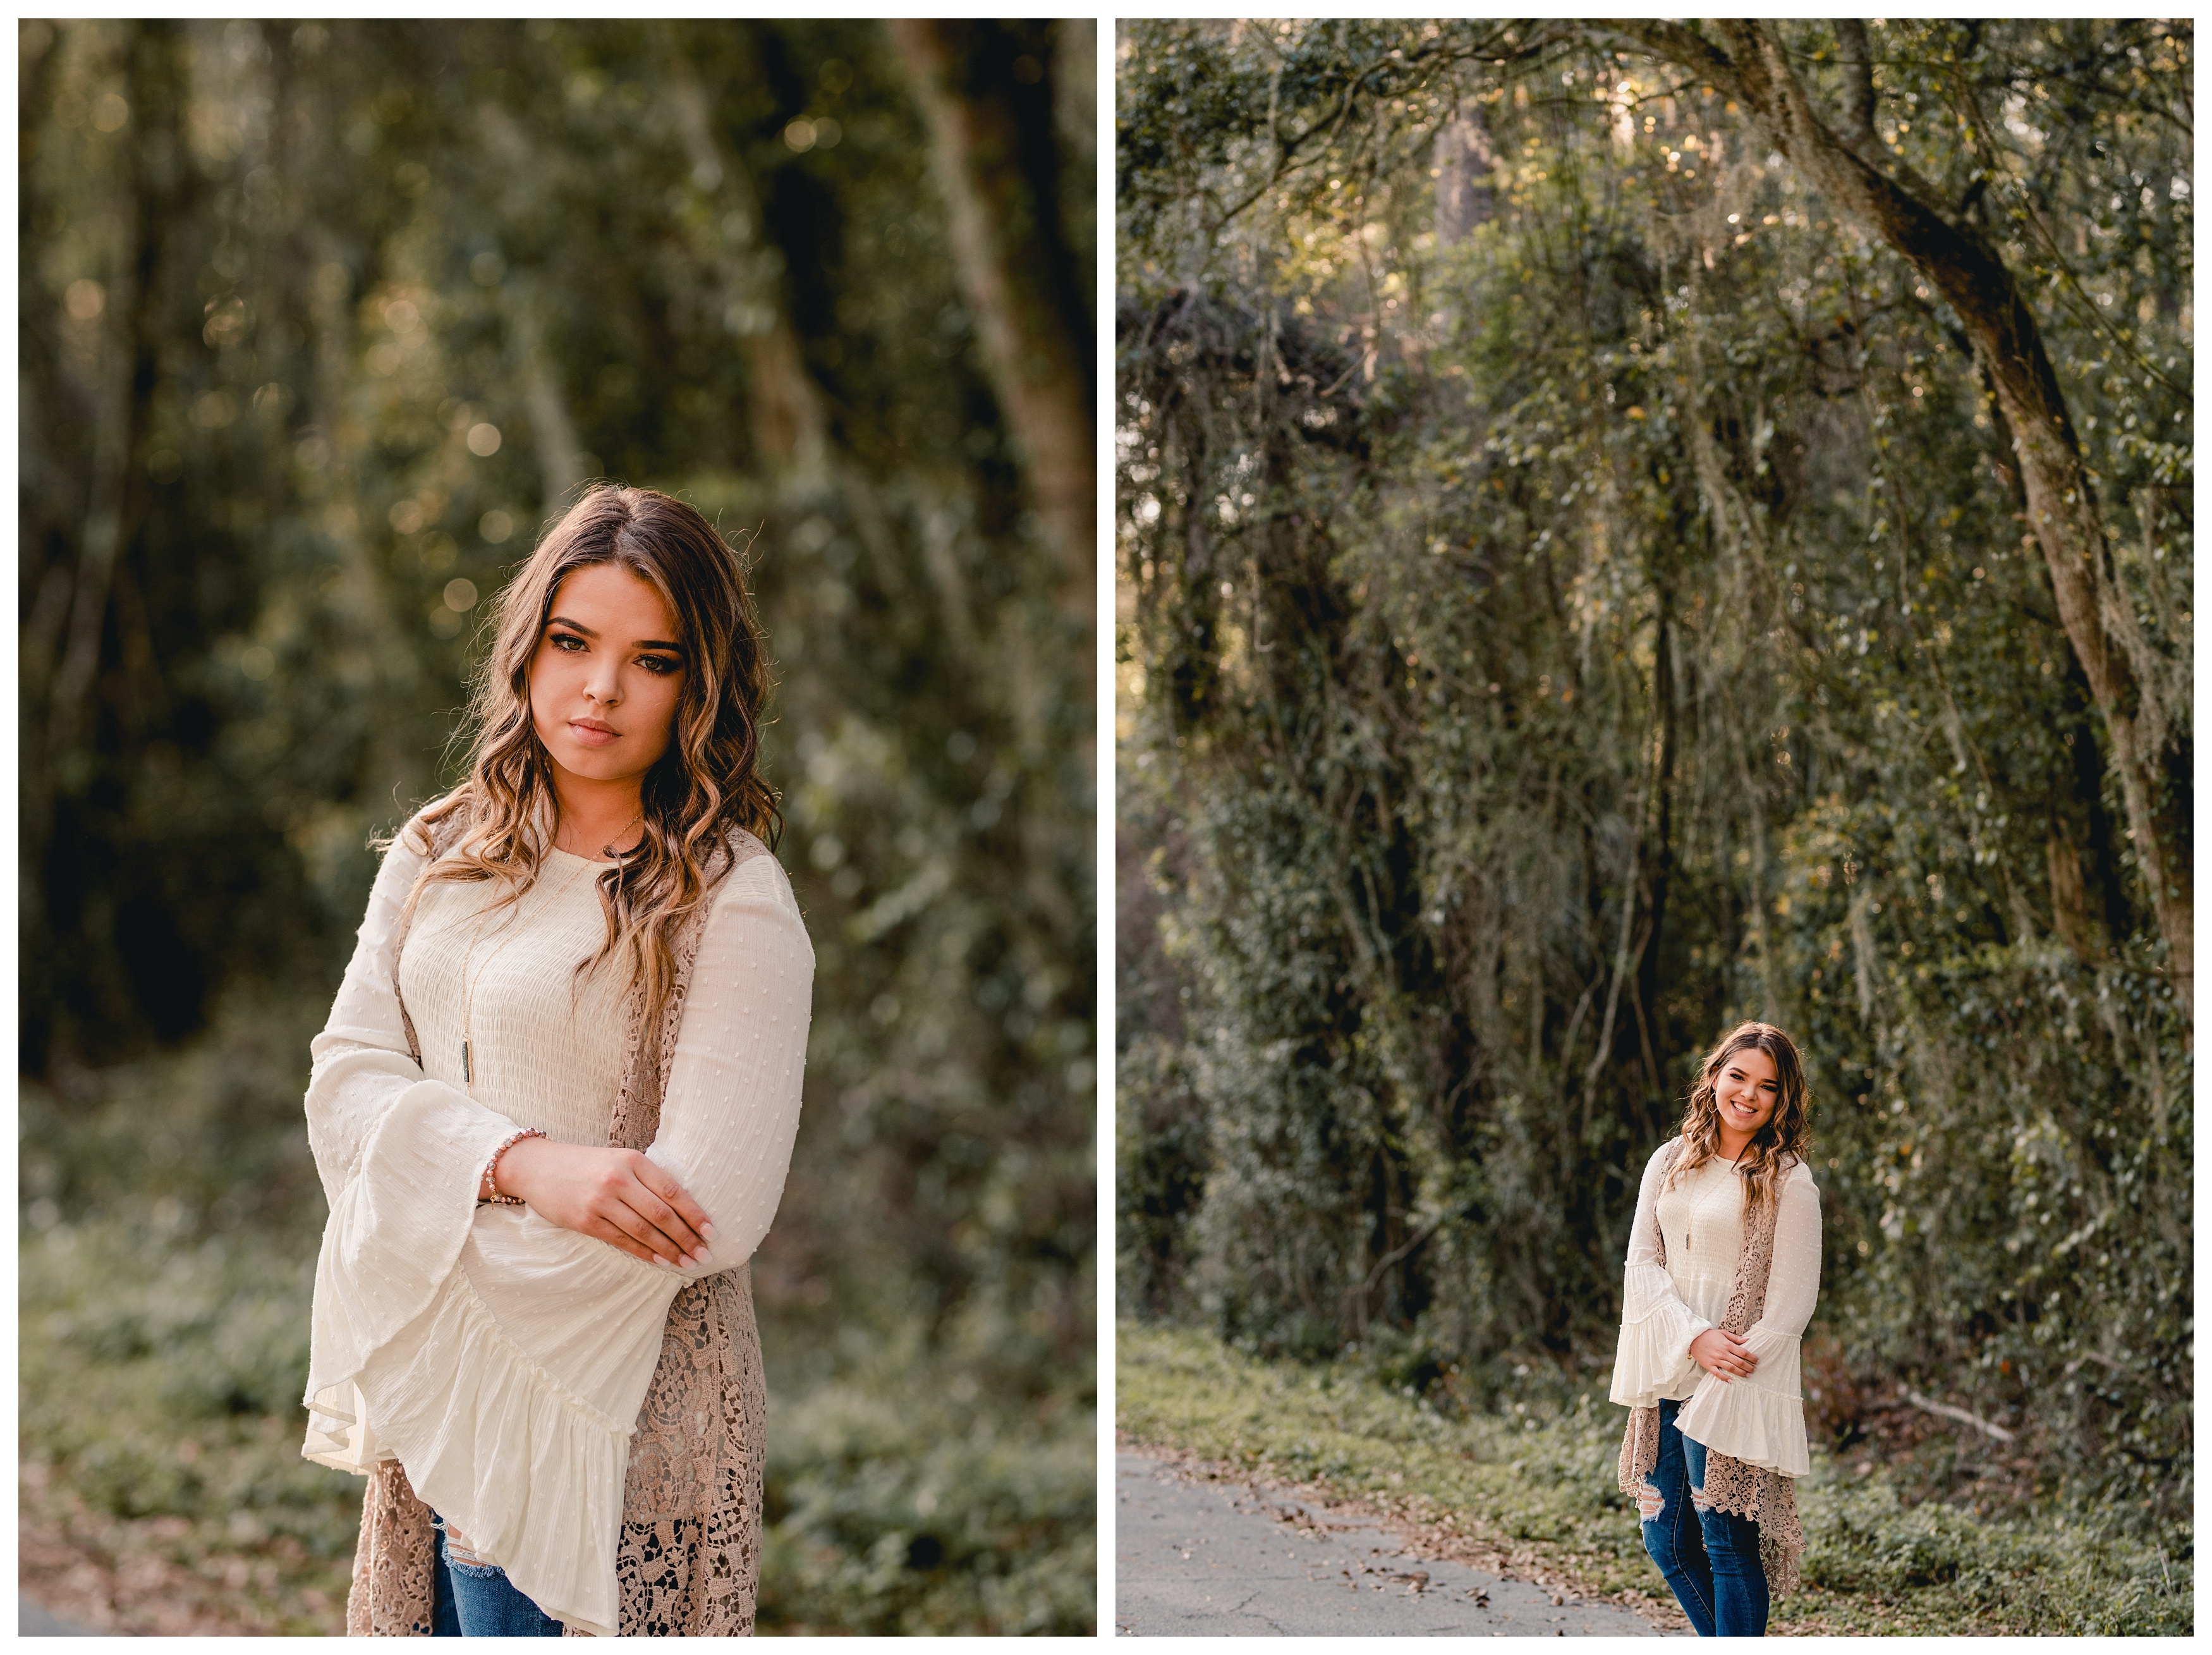 Casual and natural high school senior photos in Tallahassee, FL. Shelly Williams Photography